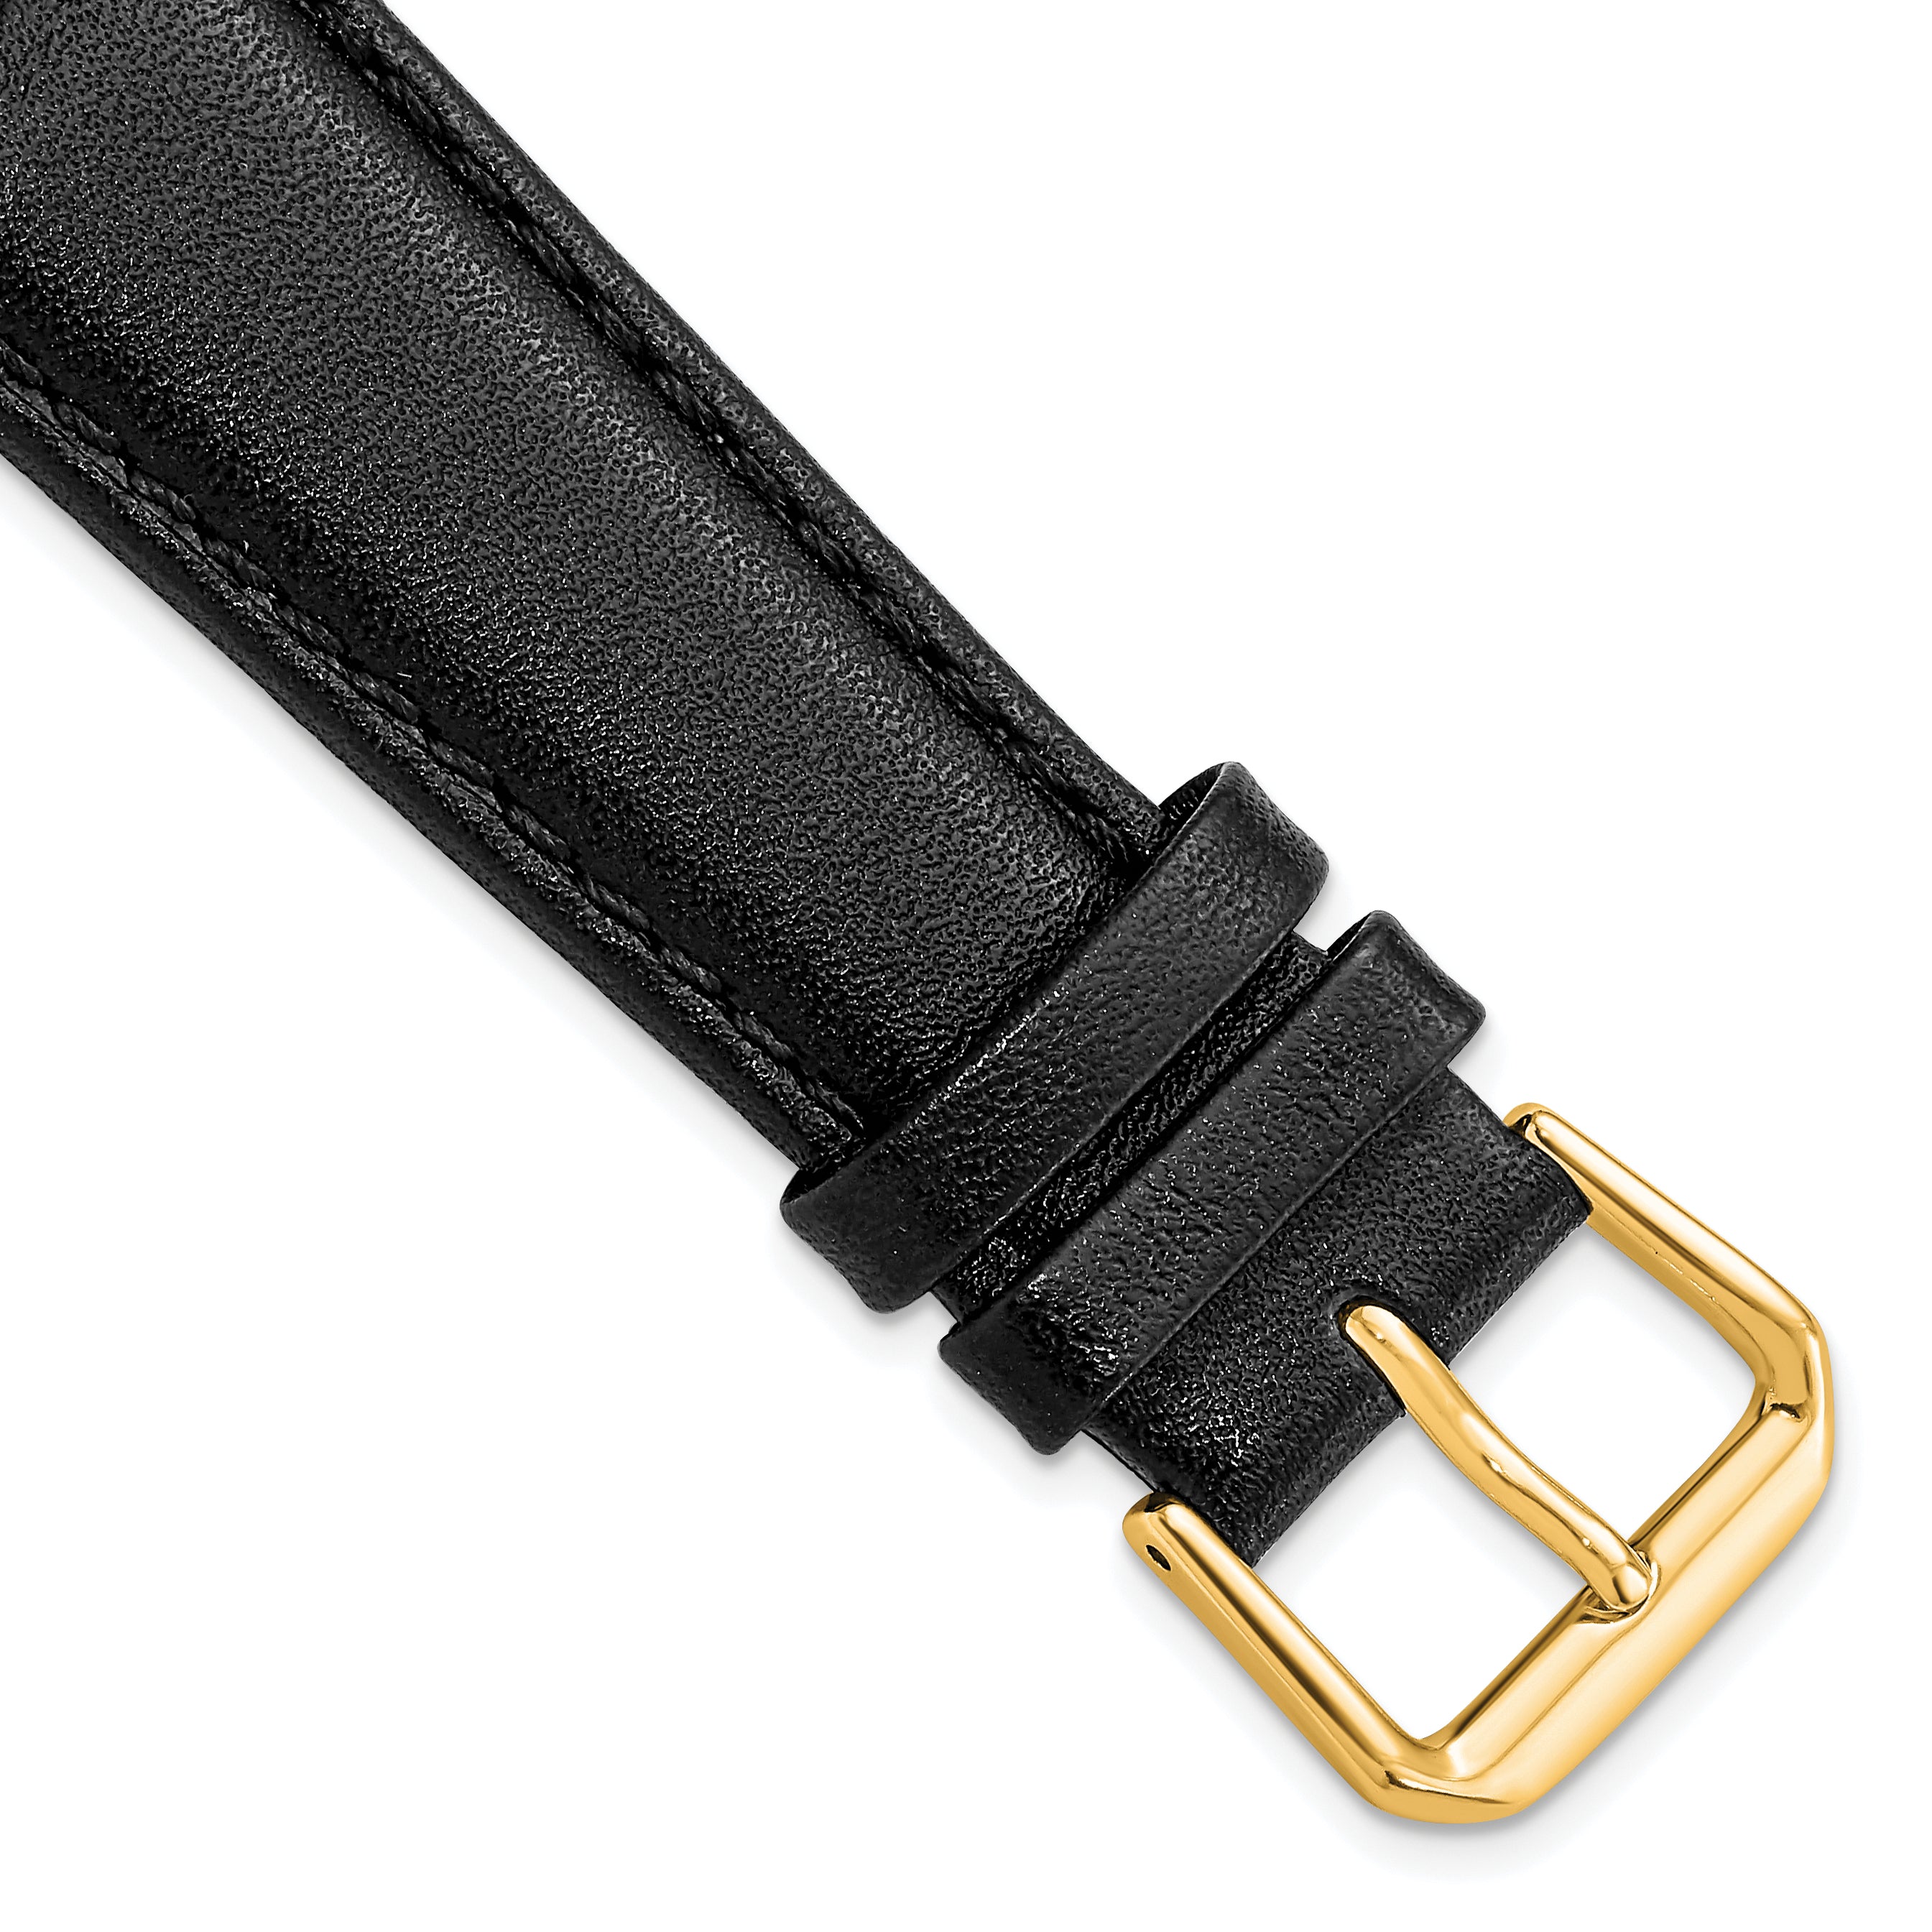 DeBeer 20mm Short Black Smooth Leather with Gold-tone Buckle 6.75 inch Watch Band